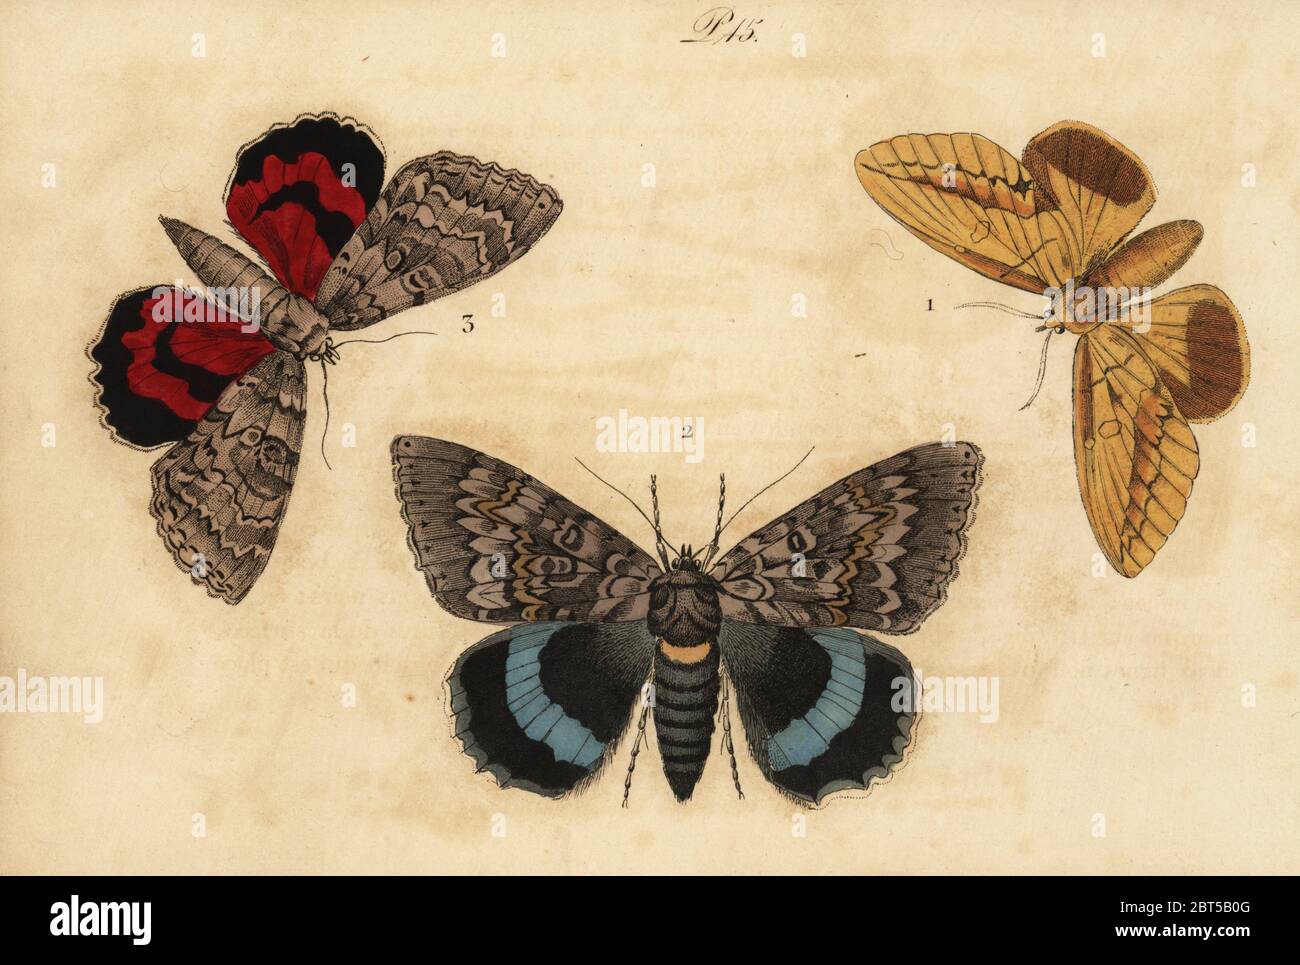 Drinker moth, Euthrix potatoria 1, blue underwing, Catocala fraxini 2, and red underwing, Catocala nupta 3. Bombyx buveur, Noctuelle du frene, Noctuelle mariee. Handcoloured lithograph from Musee du Naturaliste dedie a la Jeunesse, Histoire des Papillons, Hippolyte and Polydor Pauquet, Paris, 1833. Stock Photo